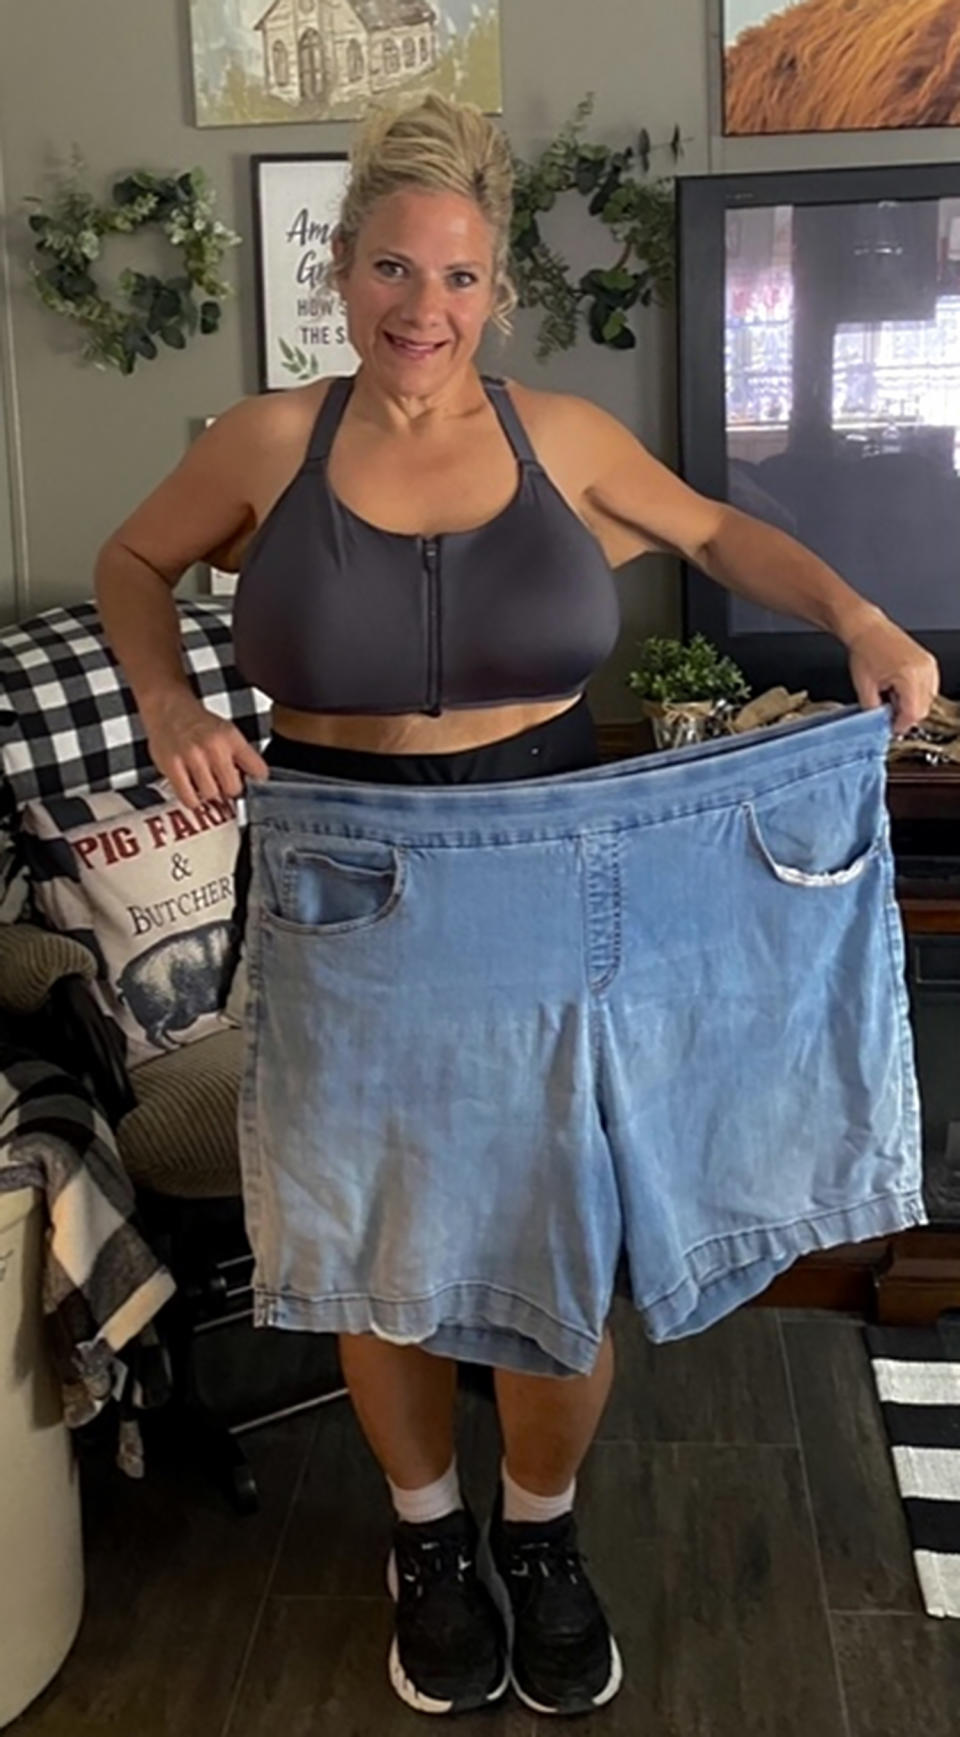 She lost 144 pounds and went from a size 24 to a size 12-14 in shorts.  (Courtesy Missy Gillenwater)